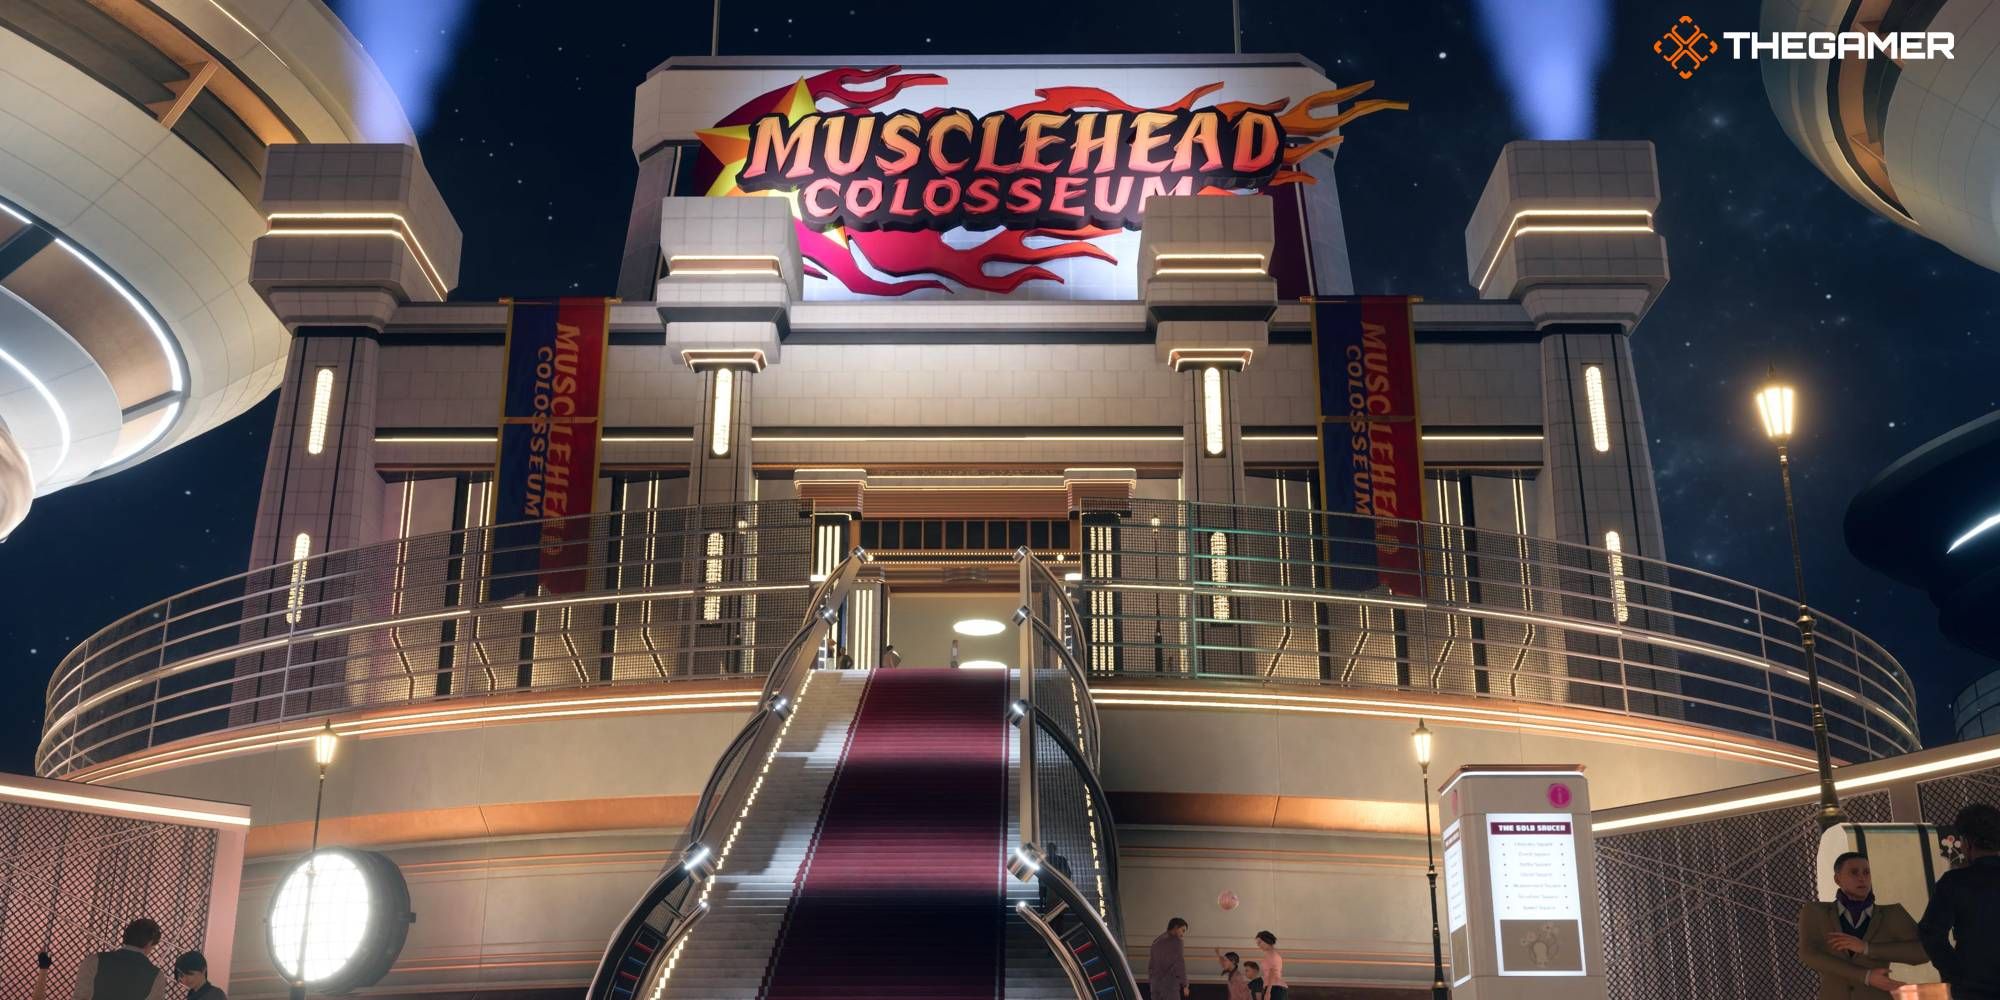 Feature image of the outside of the Gold Saucer Musclehead Colosseum in FF7 Rebirth